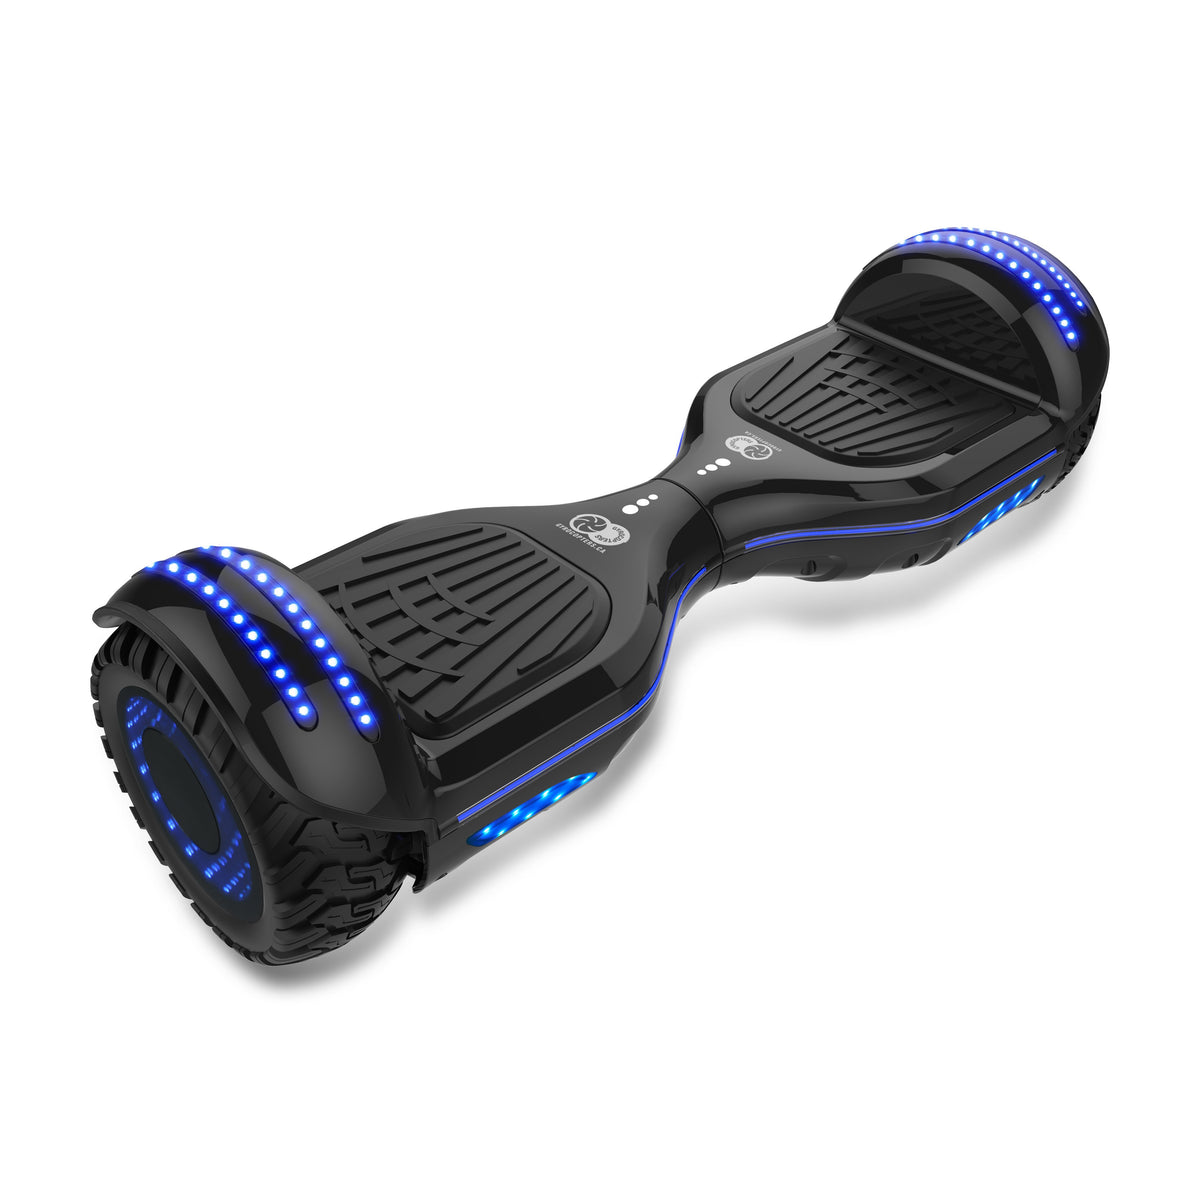 hoverboard, electric scooter, hoverkart, hoover board, hover, swagtron, hover board, gyrocopters hoverboard, hovercart, off road hoverboard, self balance scooter, canadian hoverboard, hooverboard, hoverboard with bluetooth, hoverboard with led lights, hoverboard with lights, bluetooth hoverboard, gyrocopters 8finiti, gyrocopters 8finiti hoverboard, hoverboard with lights in wheel, All terrain hoverboard, all terrain hoverboard with bluetooth